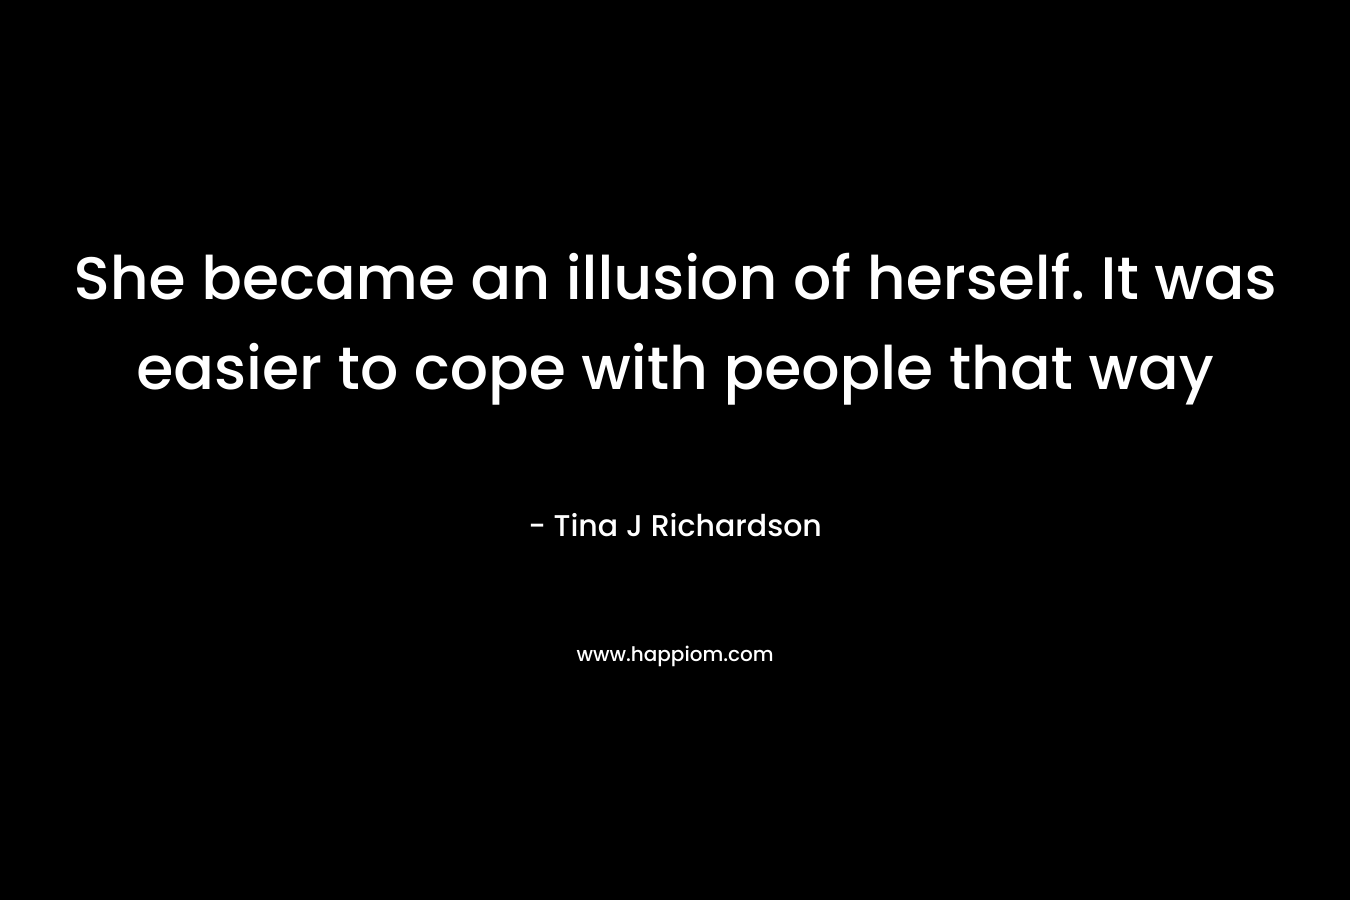 She became an illusion of herself. It was easier to cope with people that way – Tina J Richardson